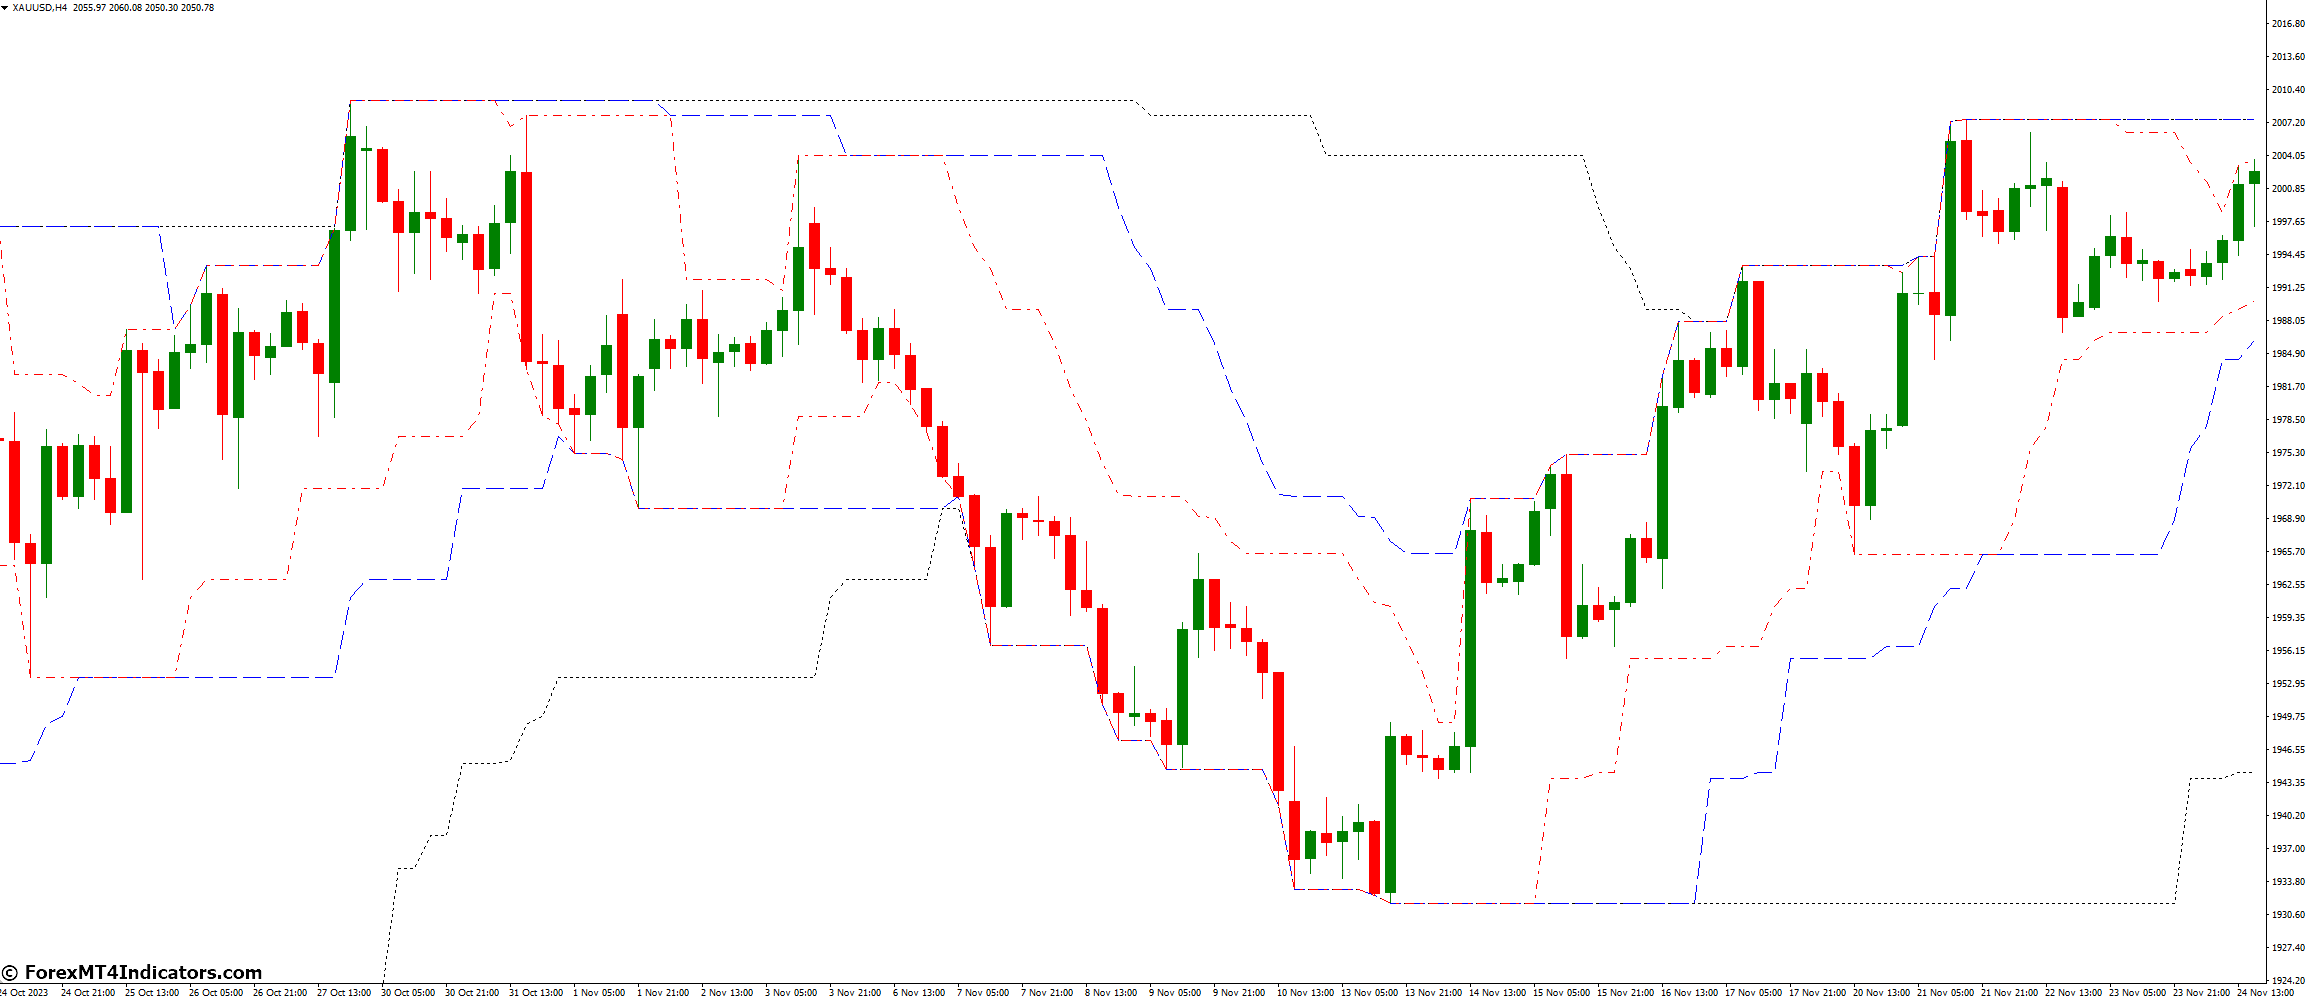 What are the Benefits of using this Indicator